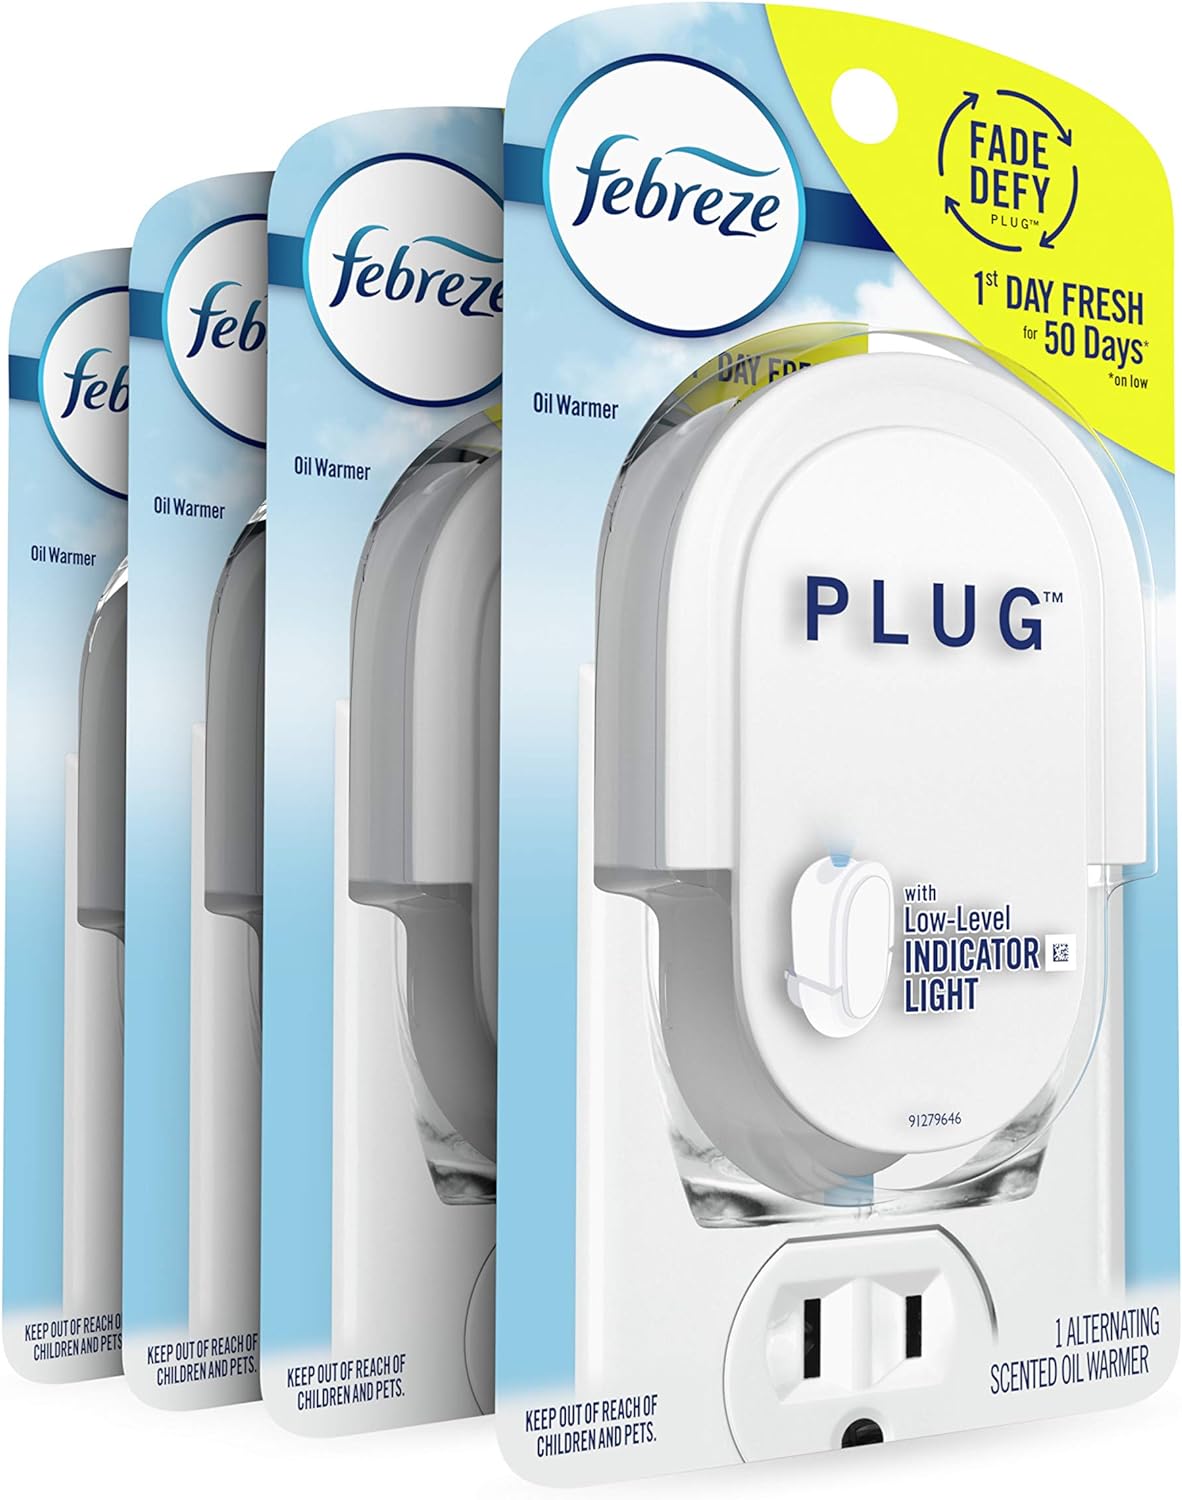 Febreze Plug In Air Freshener Fade Defy Plugs, Scented Oil Warmer, (Pack of 4)